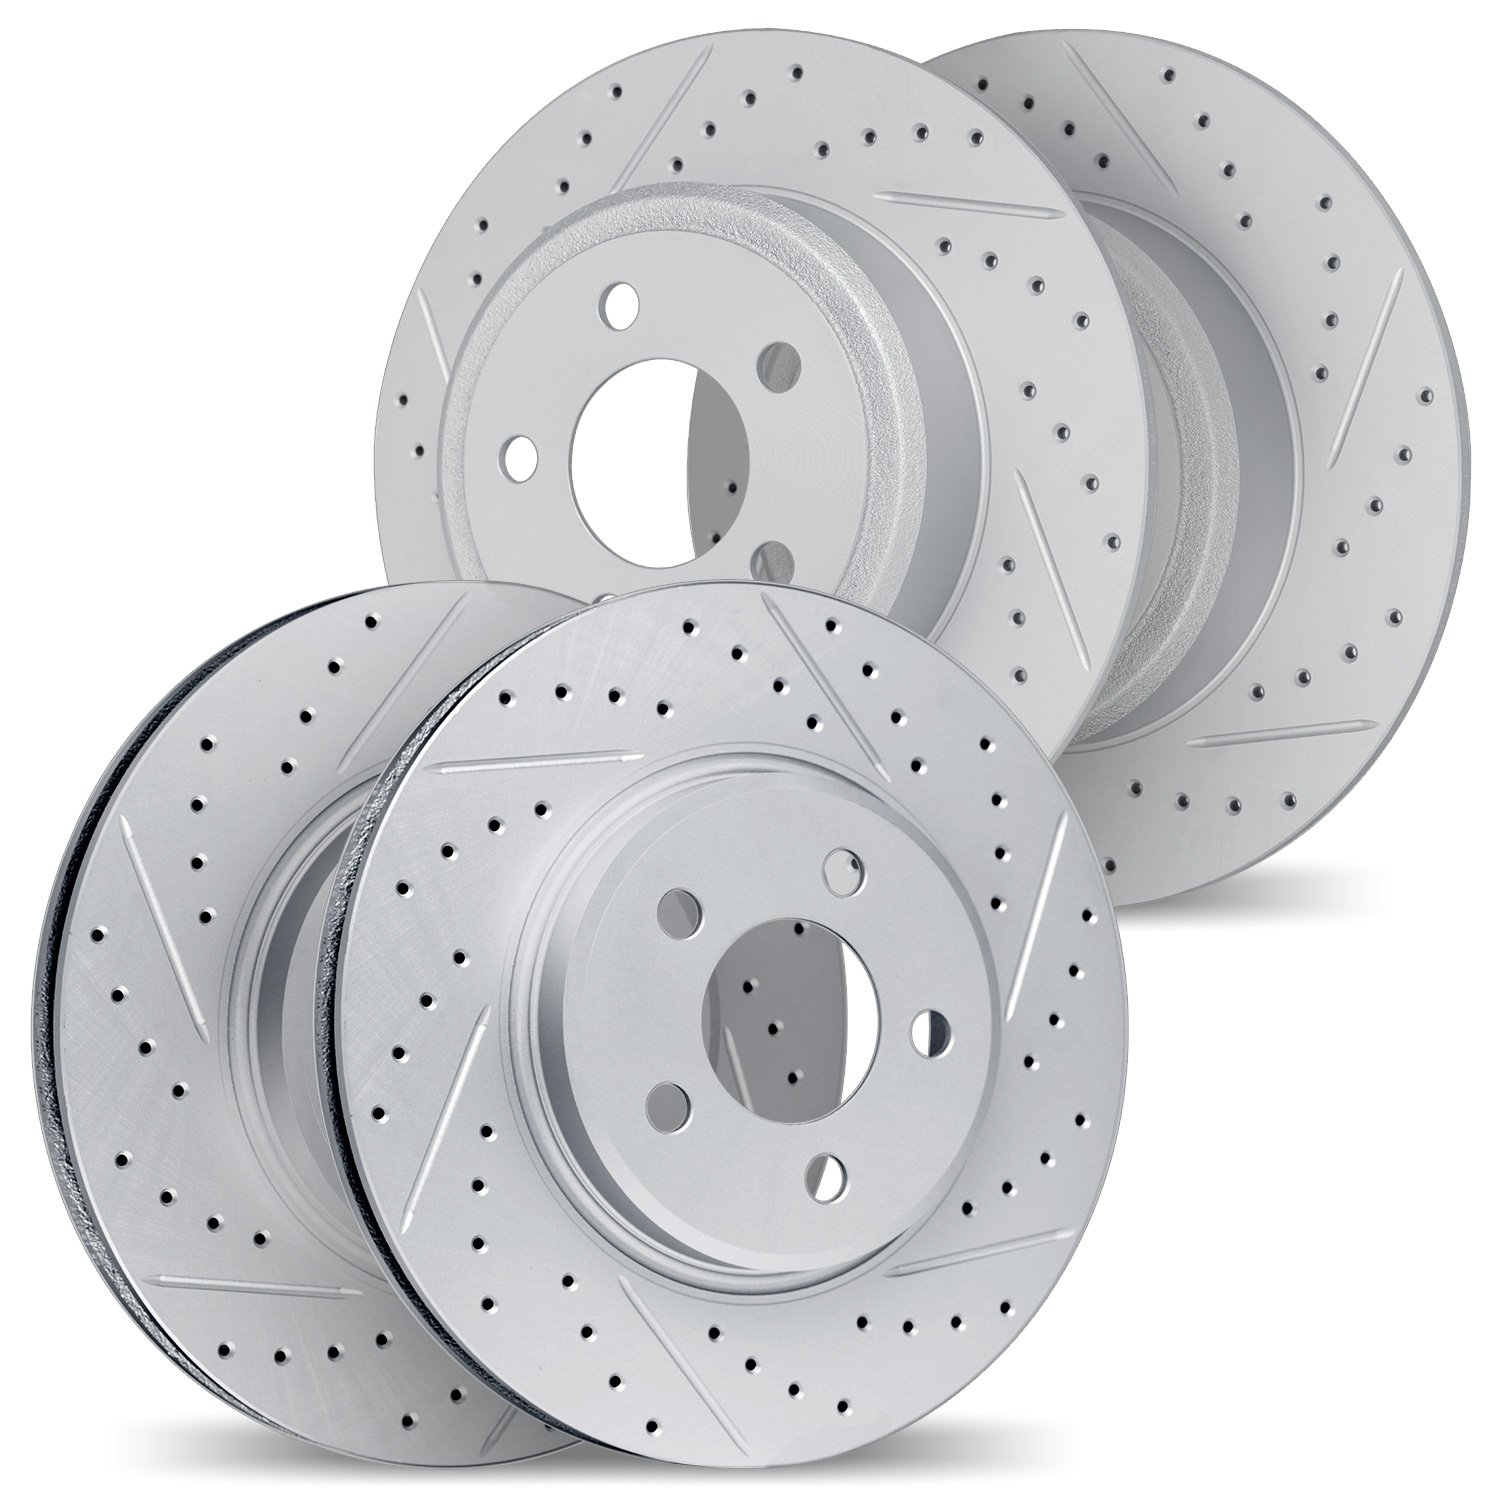 2004-39029 Geoperformance Drilled/Slotted Brake Rotors, 2004-2005 Mopar, Position: Front and Rear